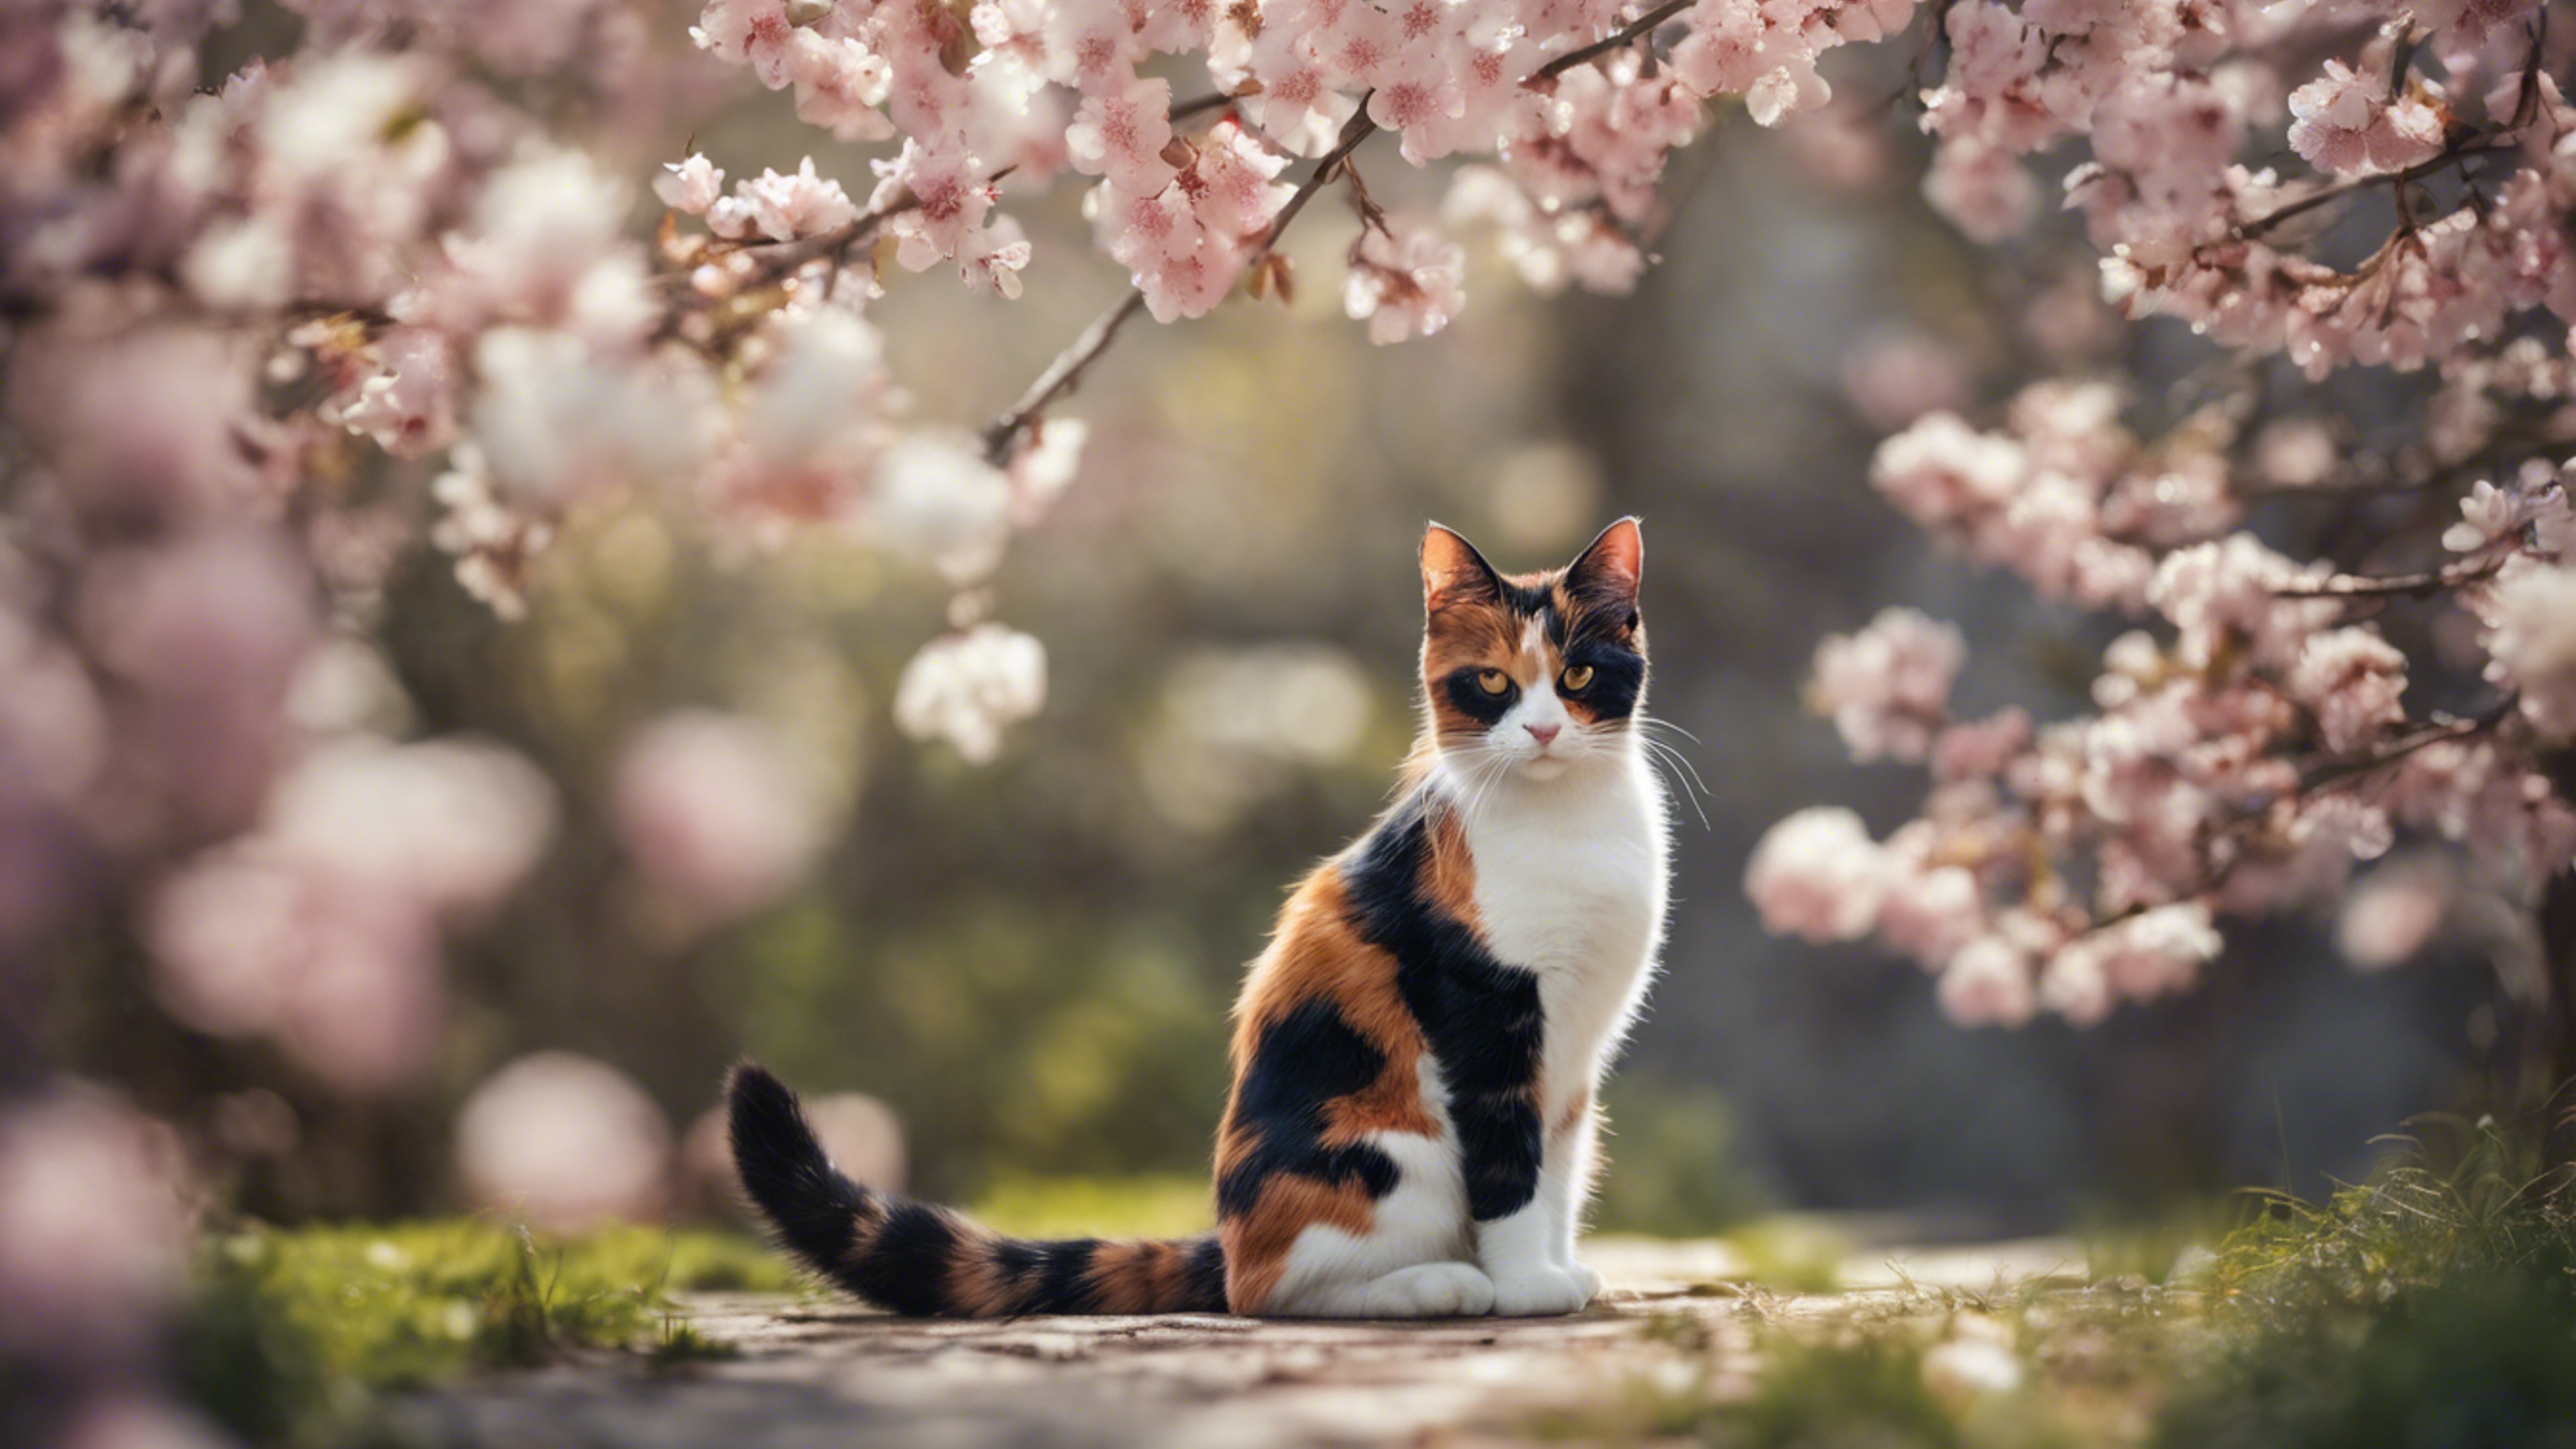 A scene of a secret conversation between spring blossoms and a curious calico cat. Wallpaper[25a93ed29c5f43b5b851]